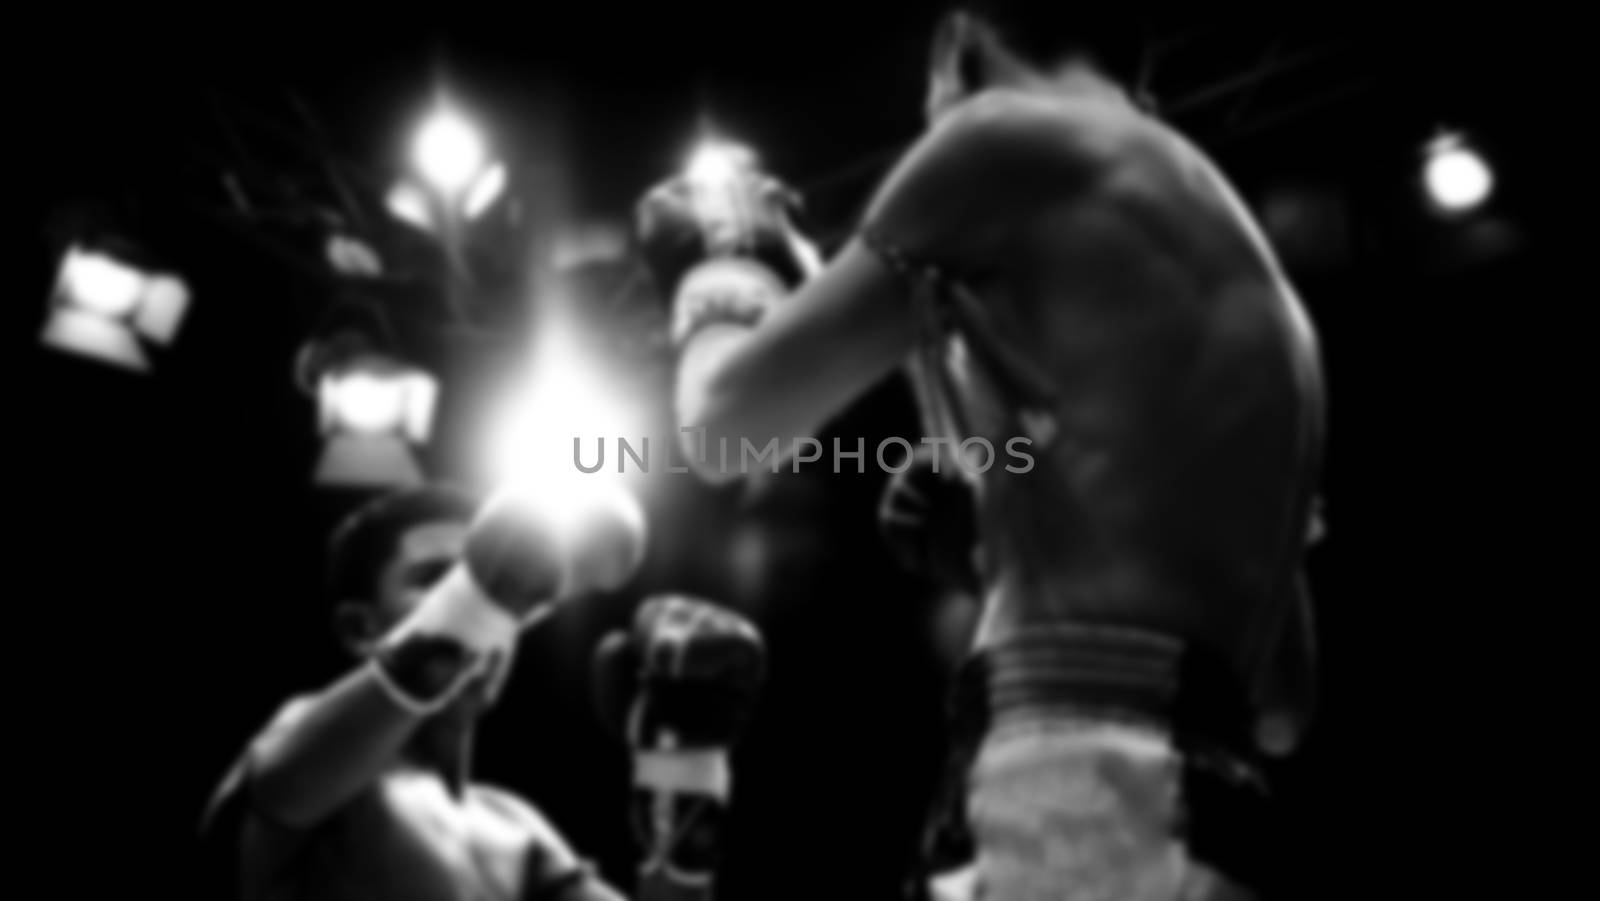 Blurred images of Thai boxing or Muay Thai on stage by gnepphoto